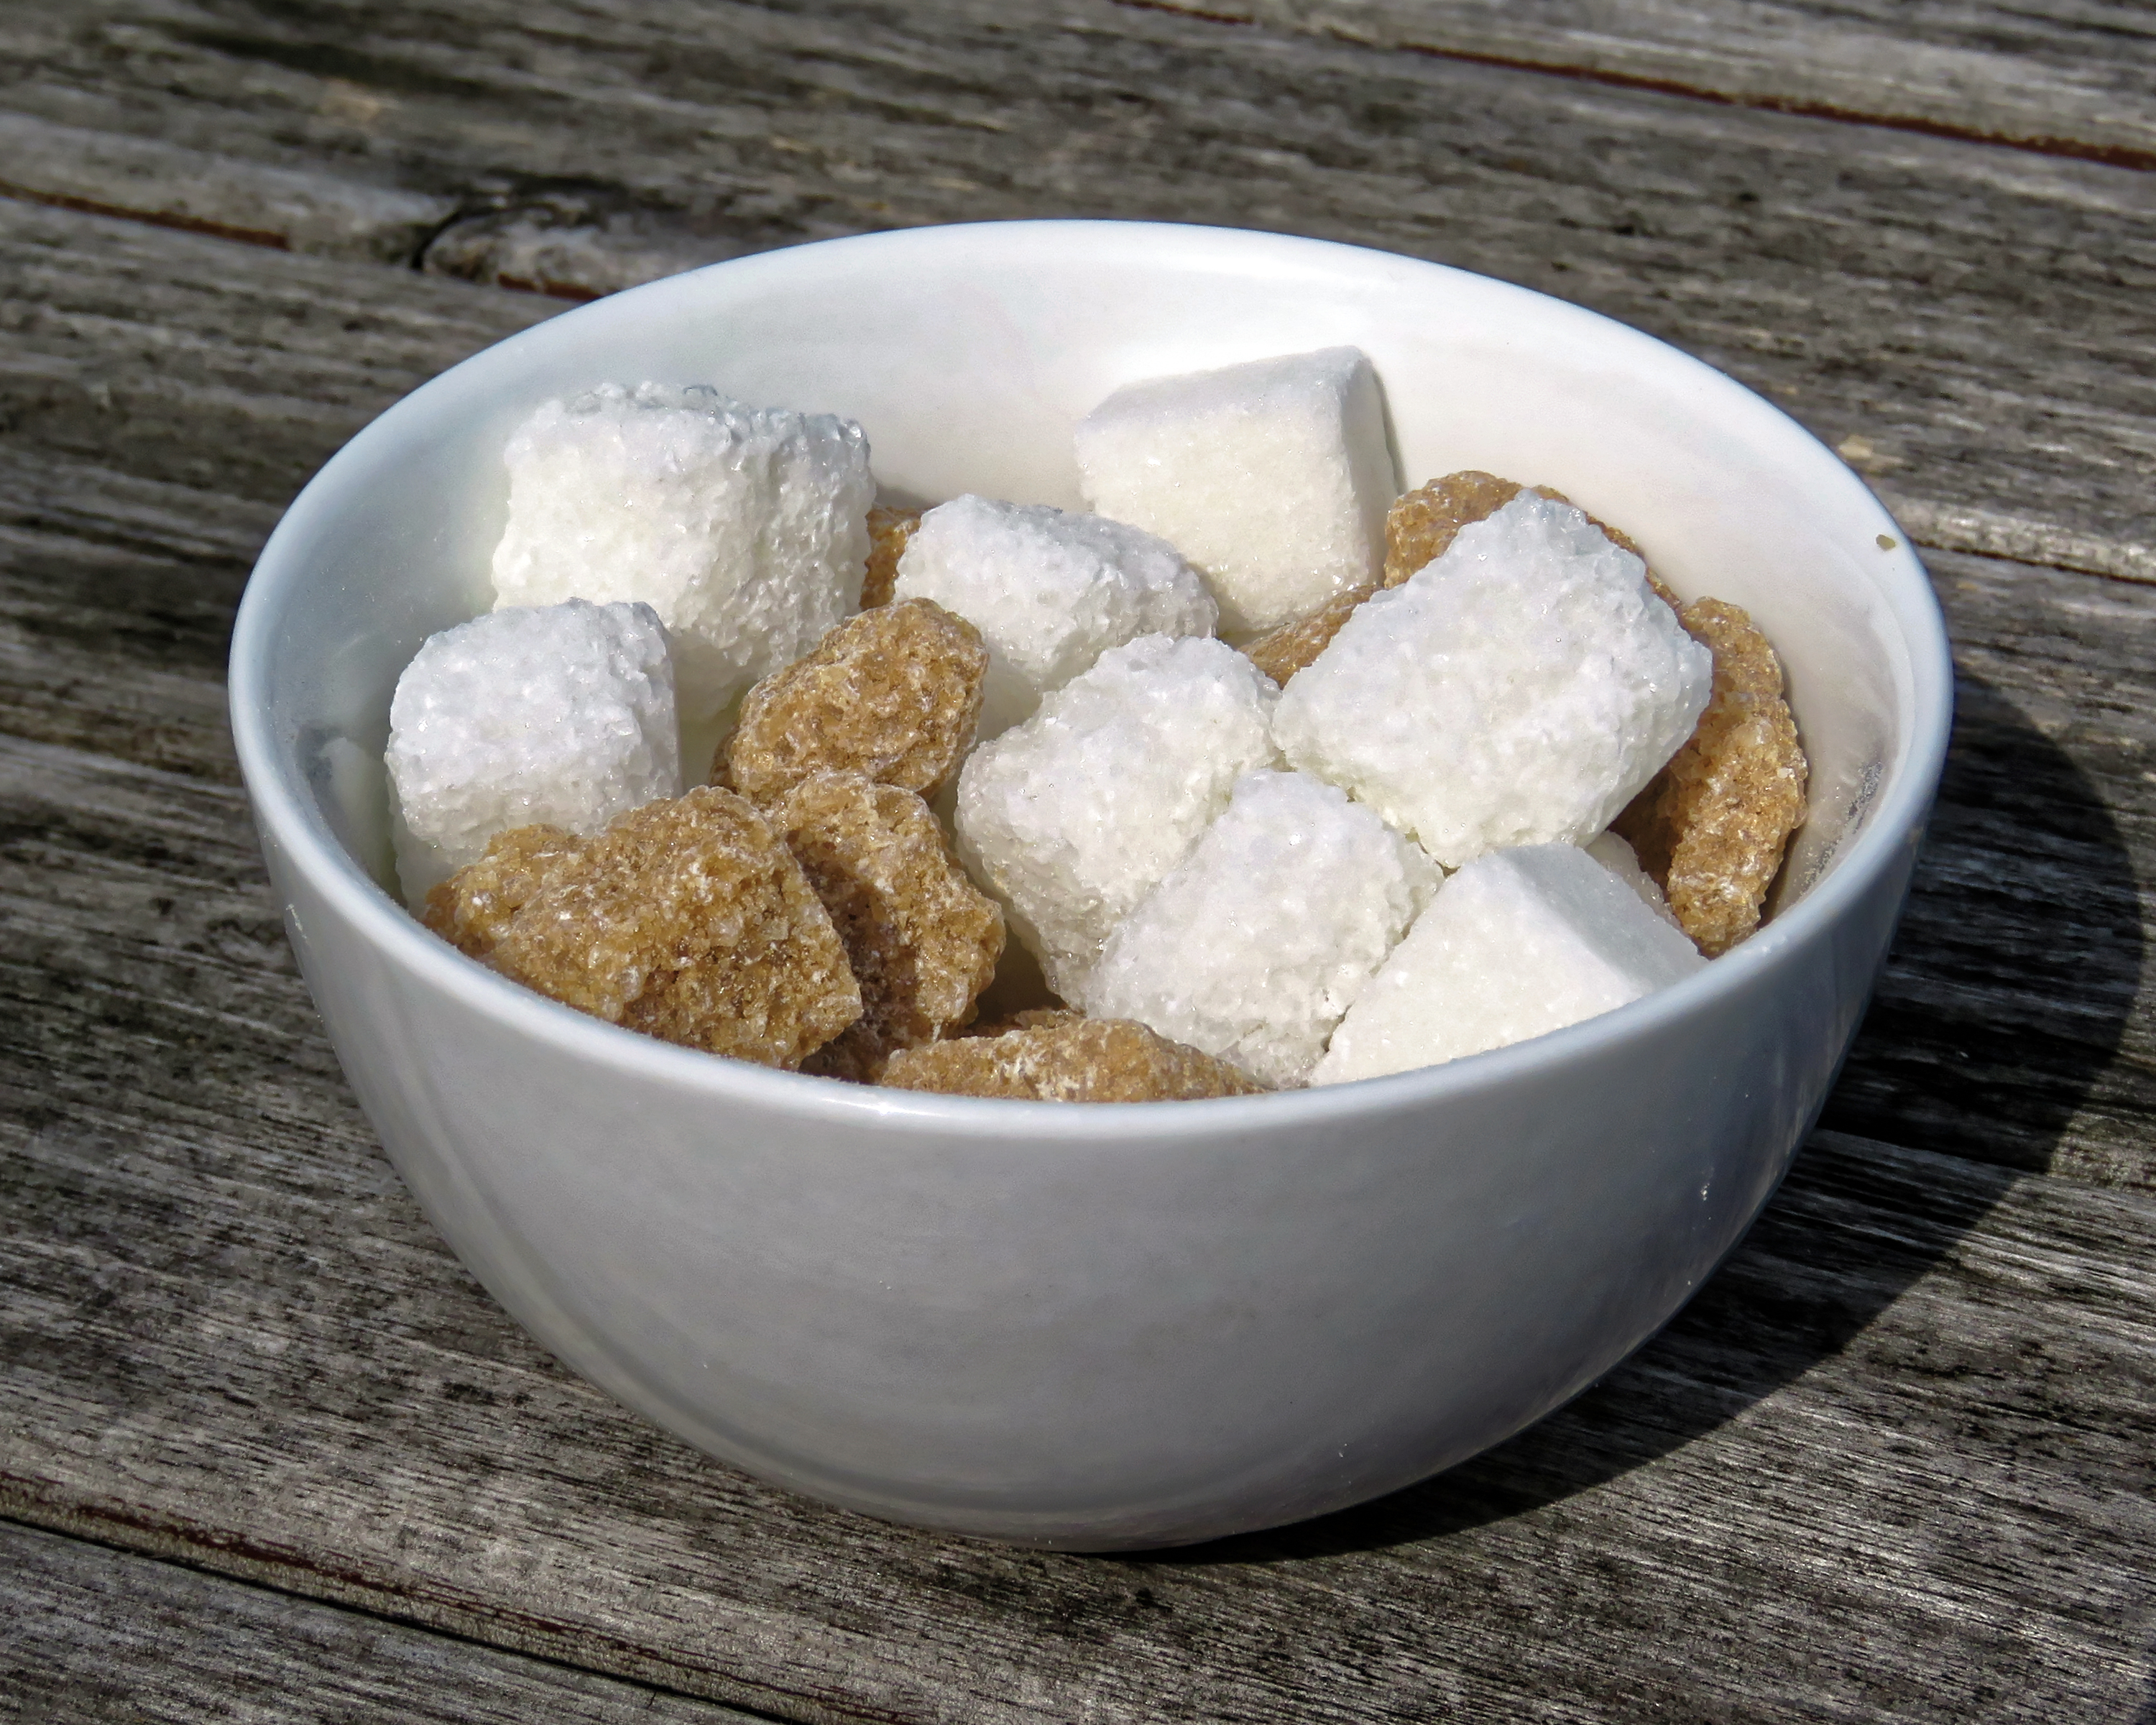 Cubes of sugar in a bowl of cereal.